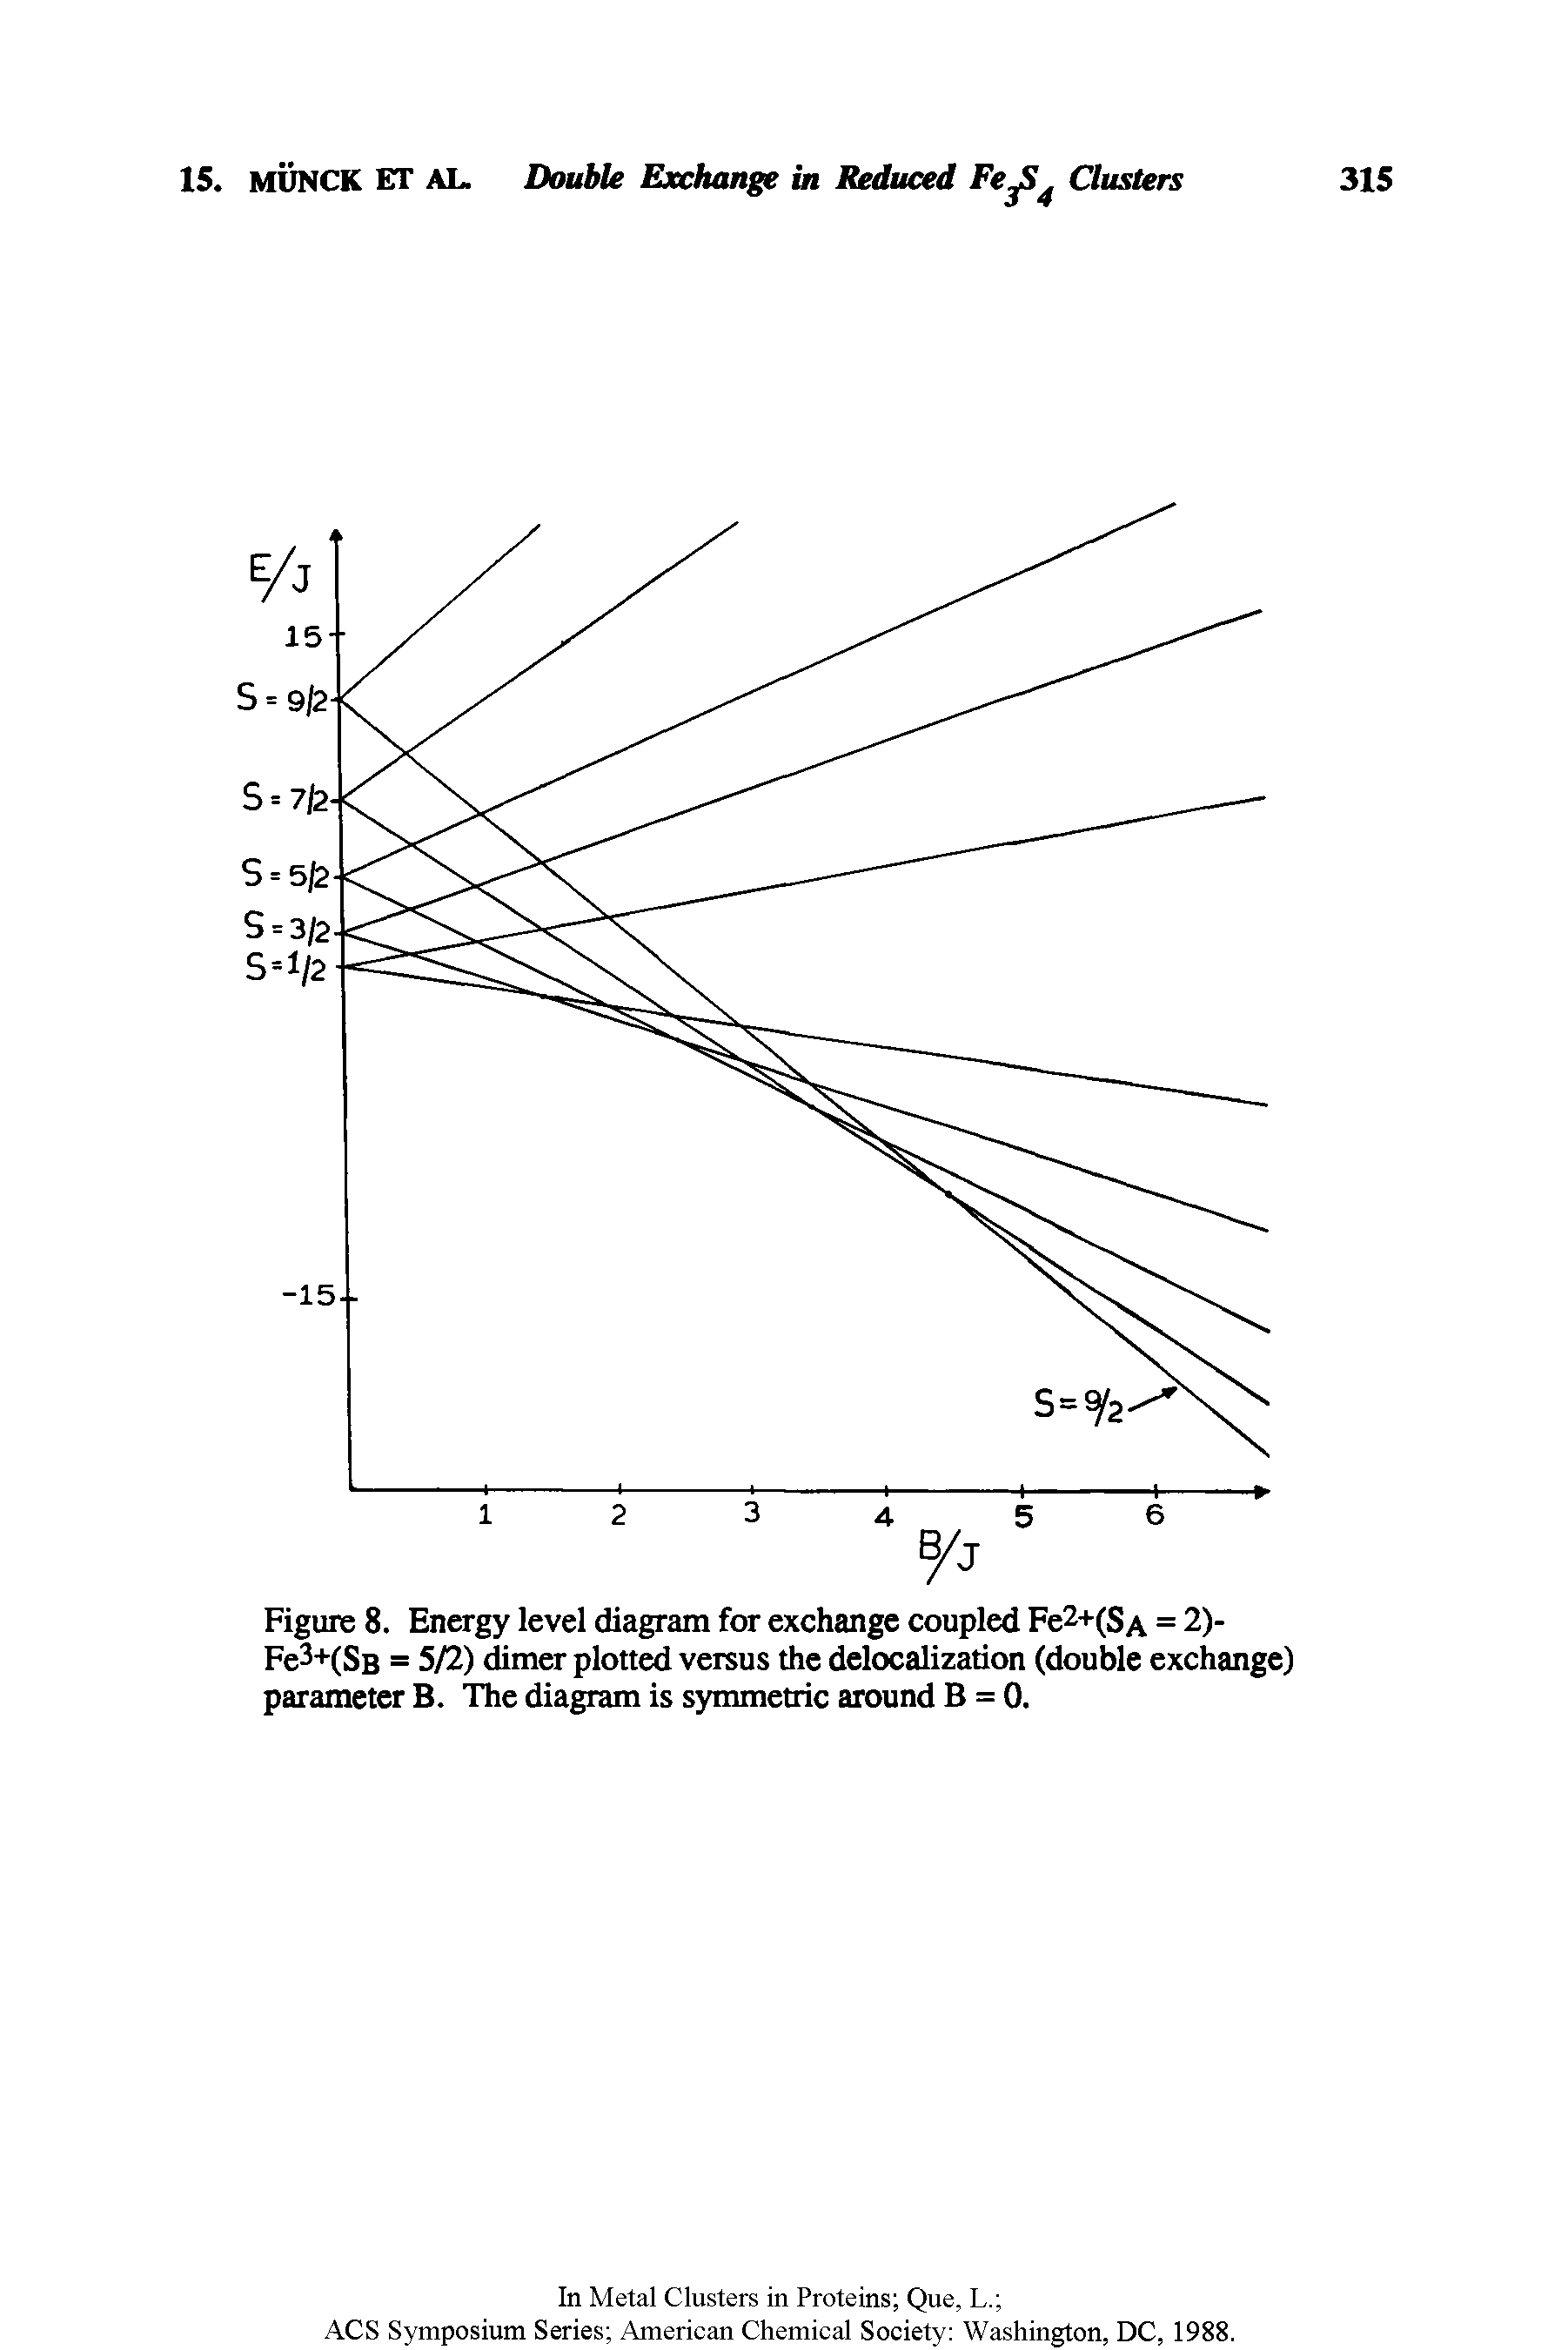 Figure 8. Energy level diagram for exchange coupled Fe2+(SA = 2)-Fe3+(Ss = 5/2) dimer plotted versus the delocalization (double exchange) parameter B. The diagram is symmetric around B = 0.